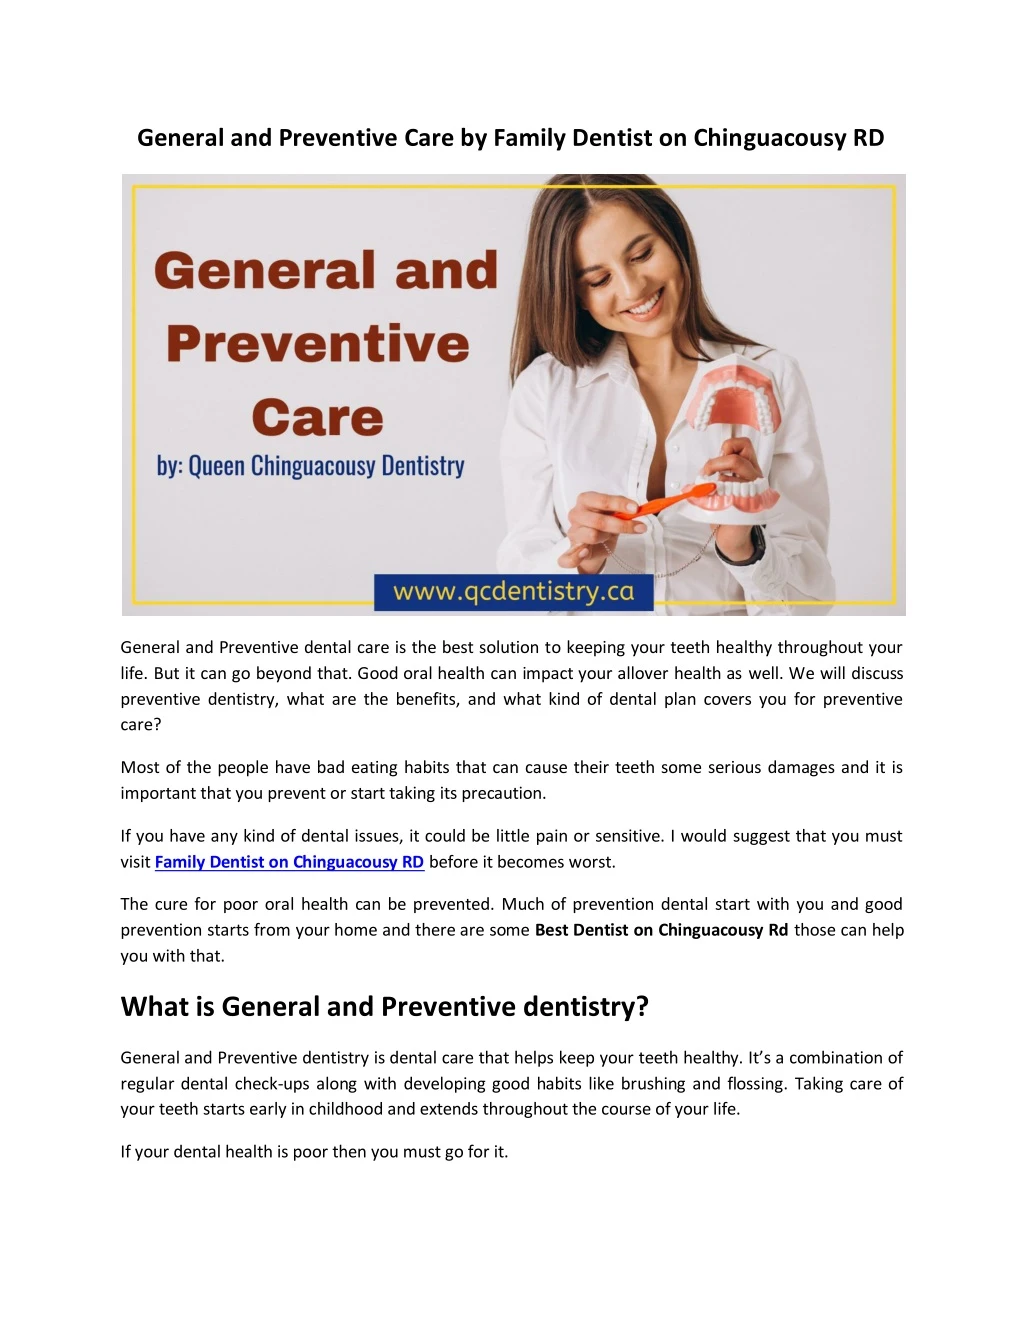 general and preventive care by family dentist